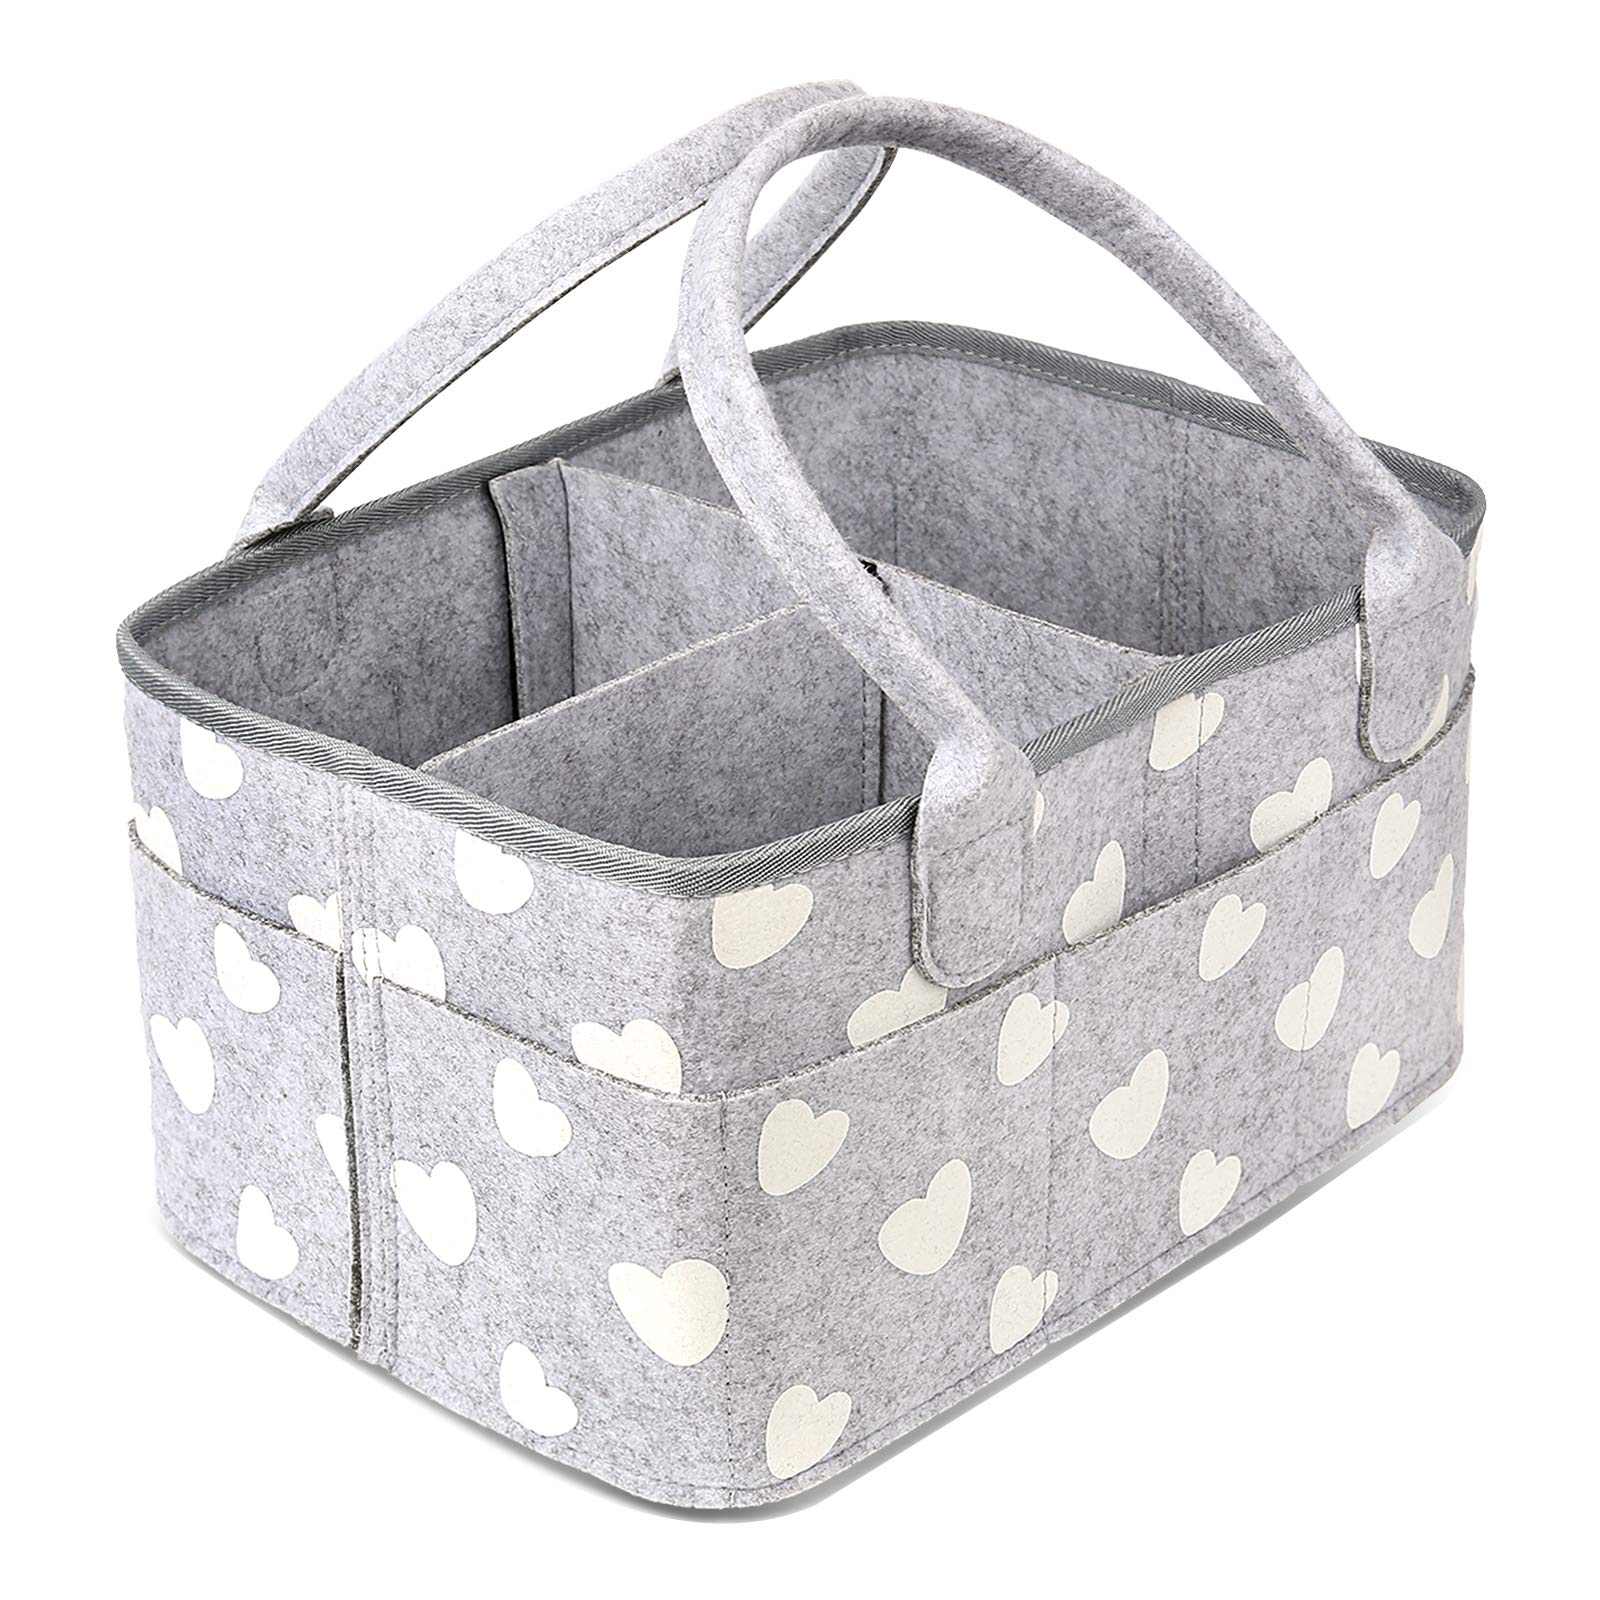 BOENFU Baby Diaper Caddy Nappy Organisers Nursery Storage Nappy Caddy Tote Newborn Shower Gift Basket Portable Car Travel Organizer with Detachable Divider and 10 Invisible Pockets for Mom Kids